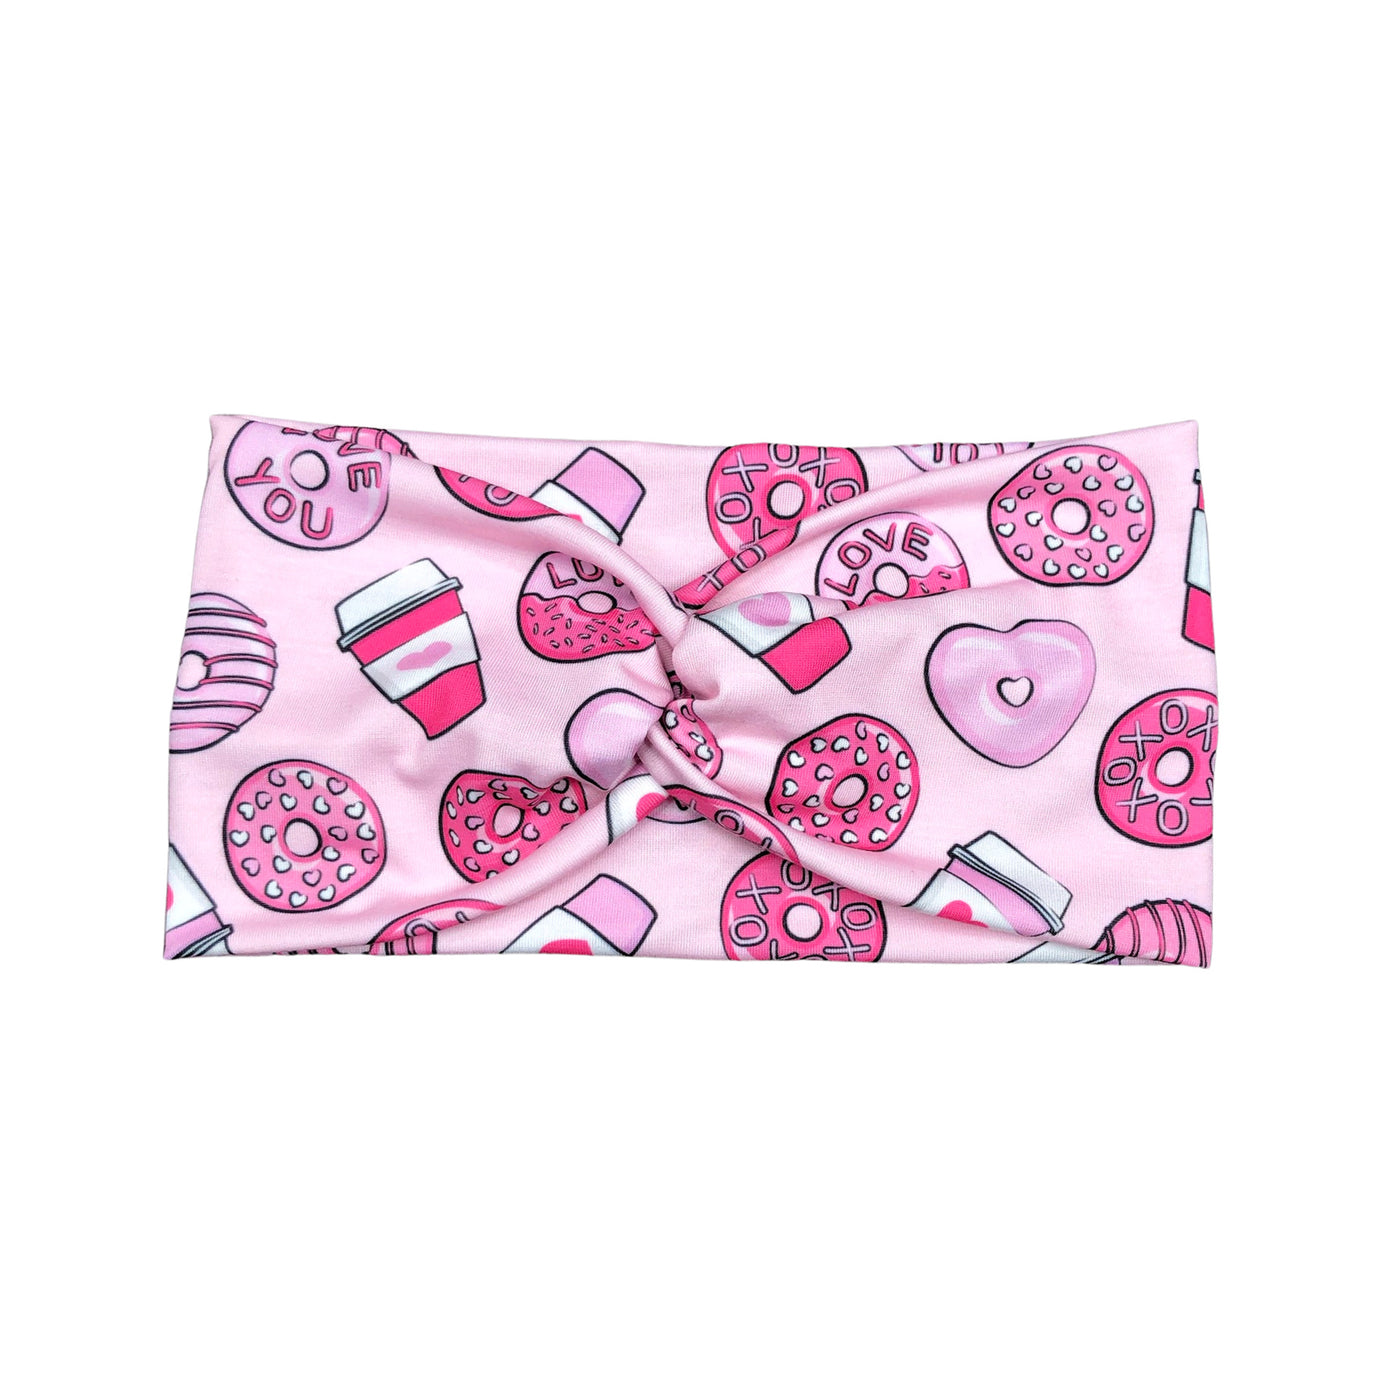 Wide Valentine's Coffee and Donuts Headband for Women